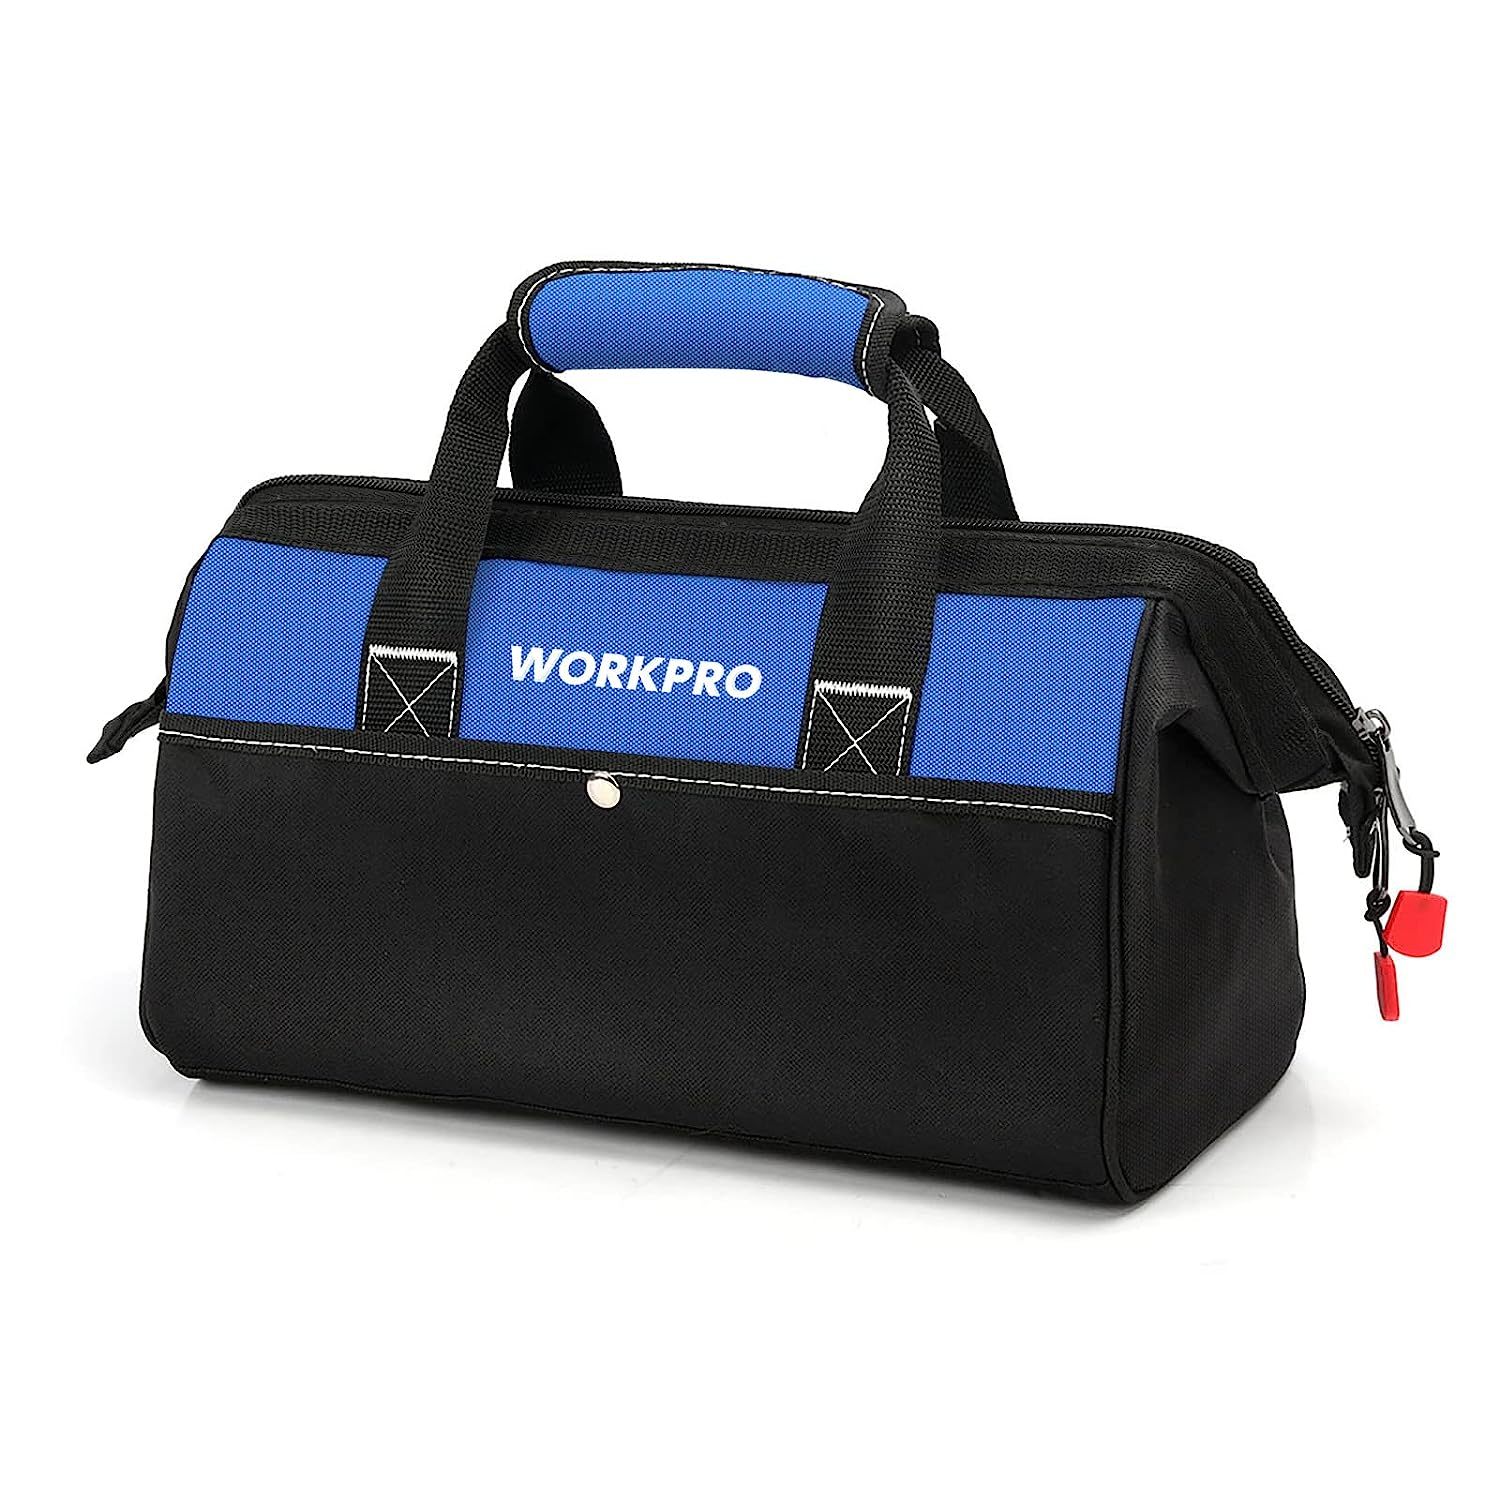 WORKPRO 13-inch Tool Bag, Wide Mouth Tool Tote Bag with Inside Pockets for Tool  - $37.04